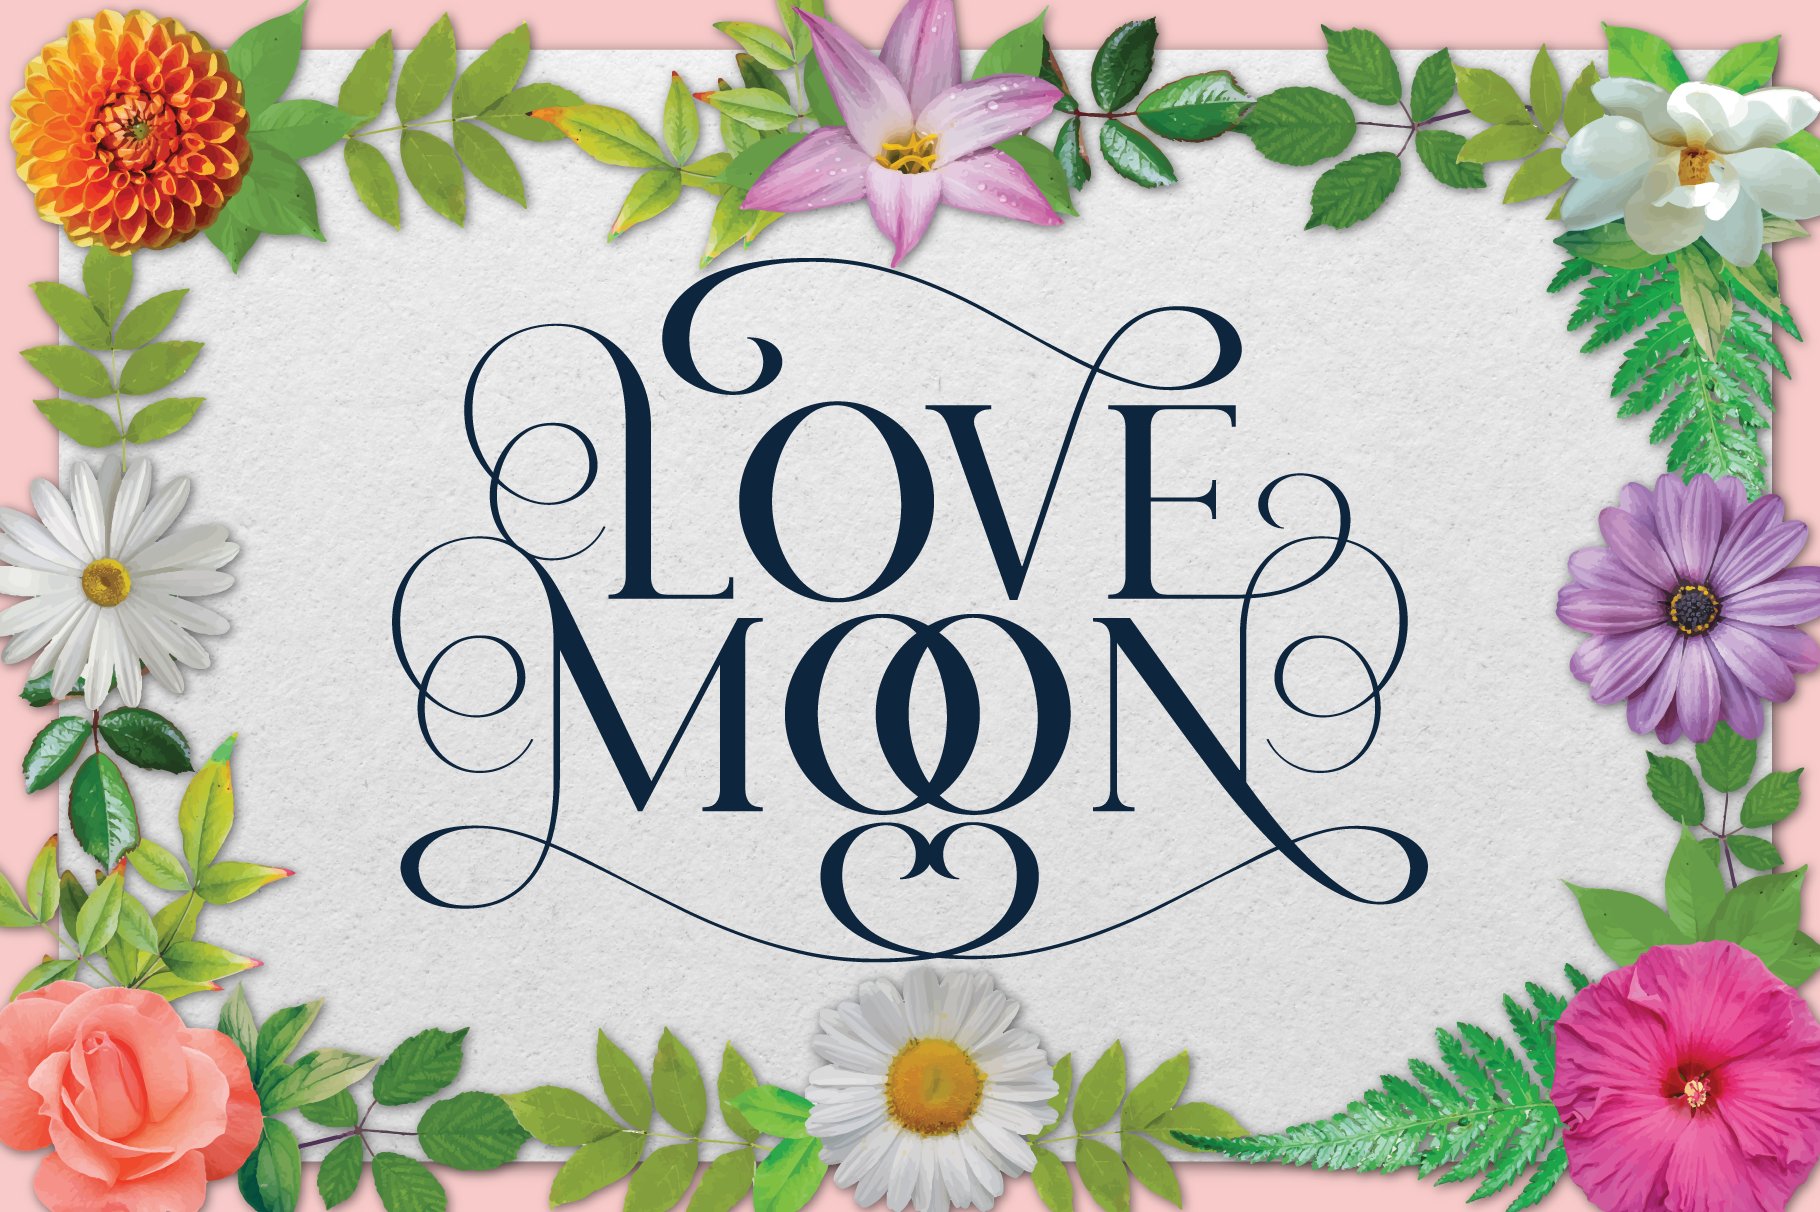 Love Moon cover image.